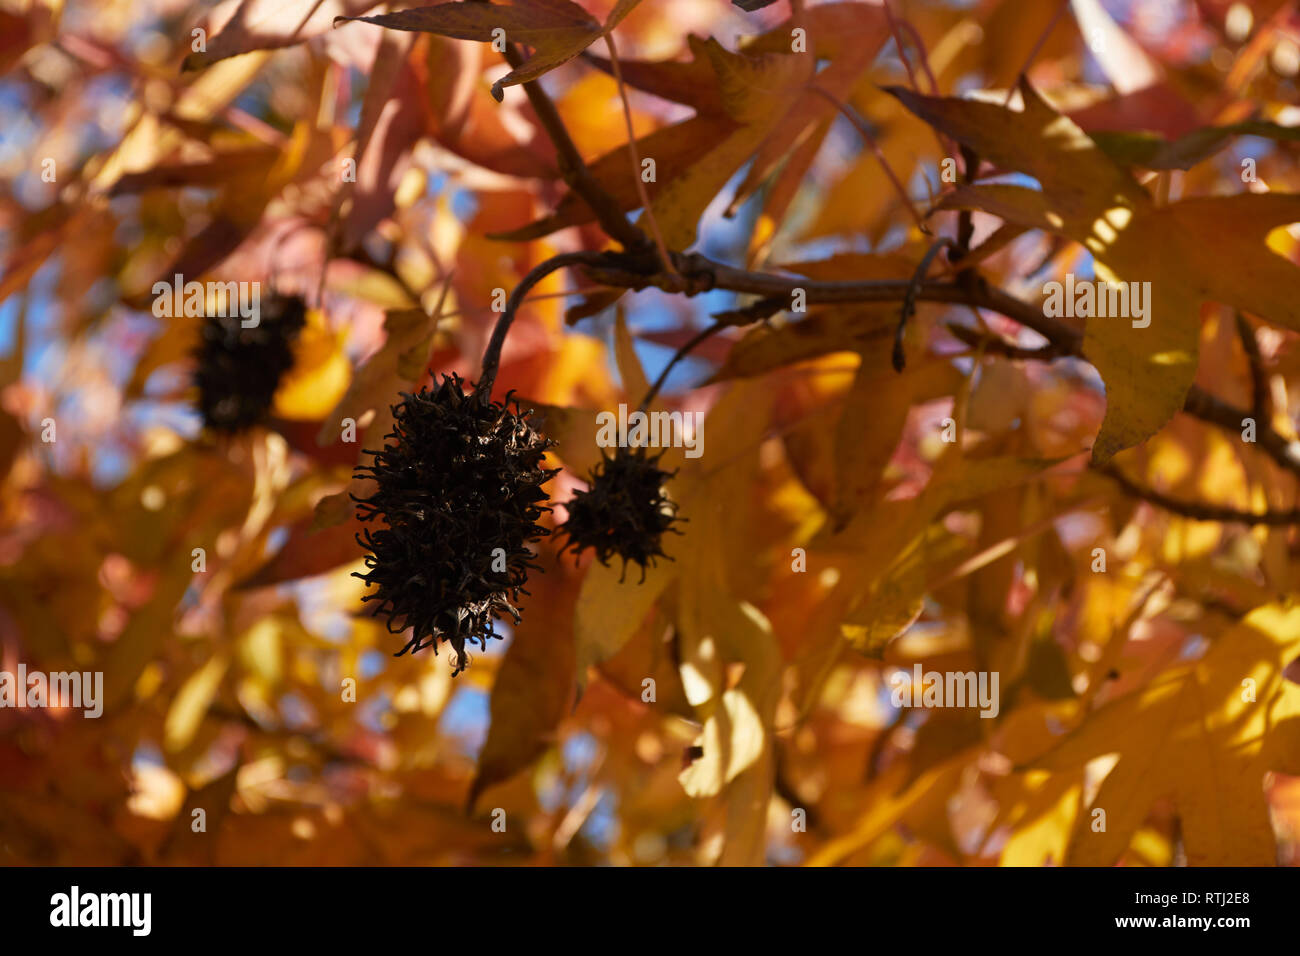 Maple leaves nature photograph Stock Photo